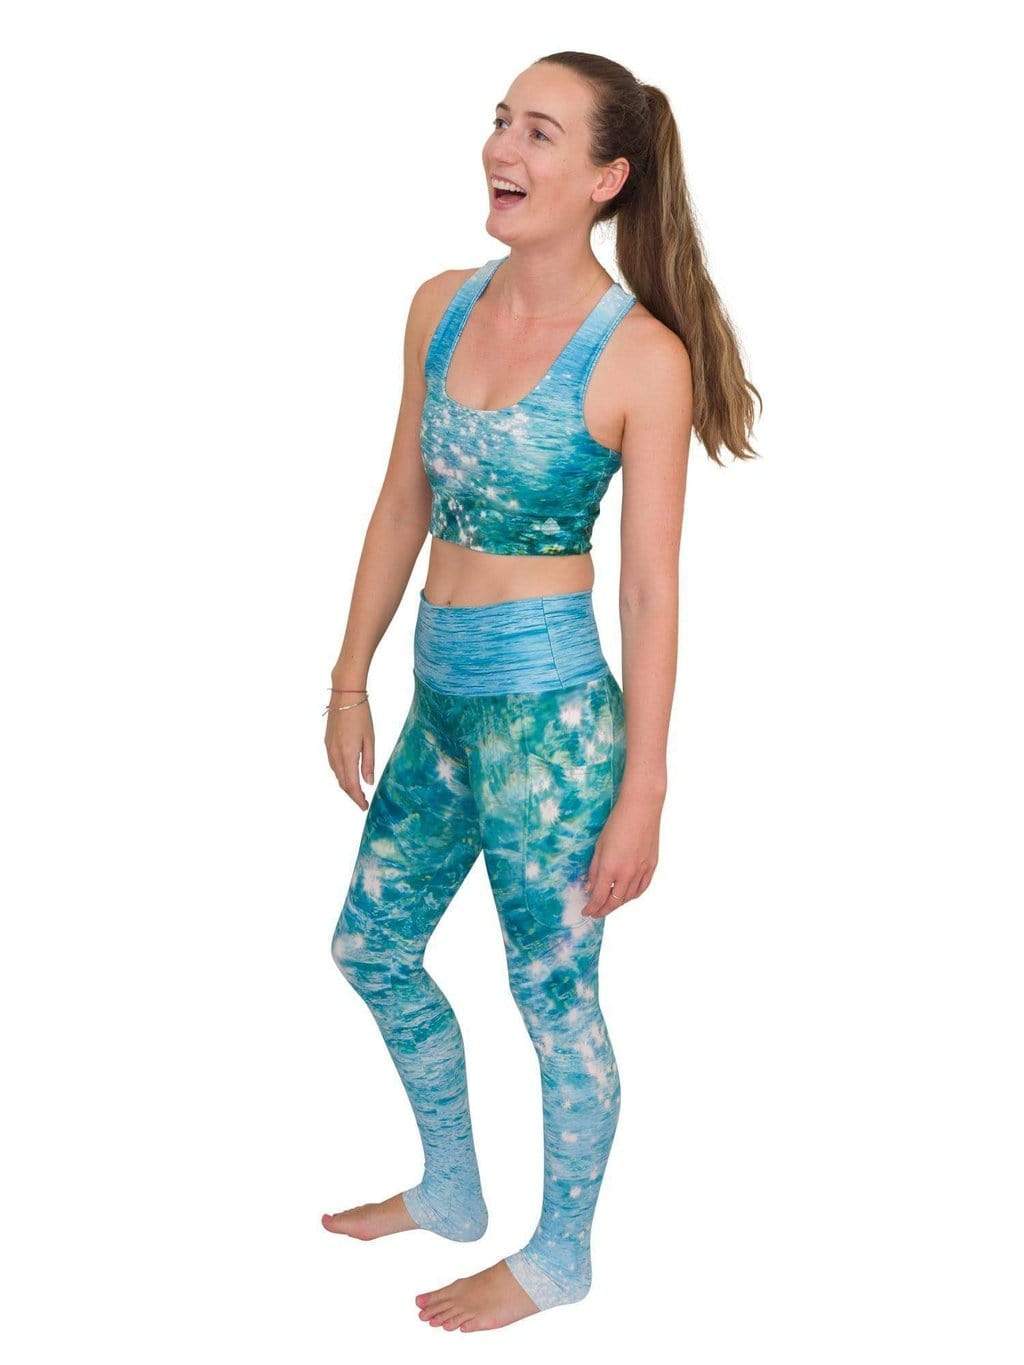 Model: Laura is our Chief Product Officer at Waterlust, a scuba diver, kiter and recreational yogi. She is 5’10, 147 lbs, 34B and is wearing a S top and M legging.